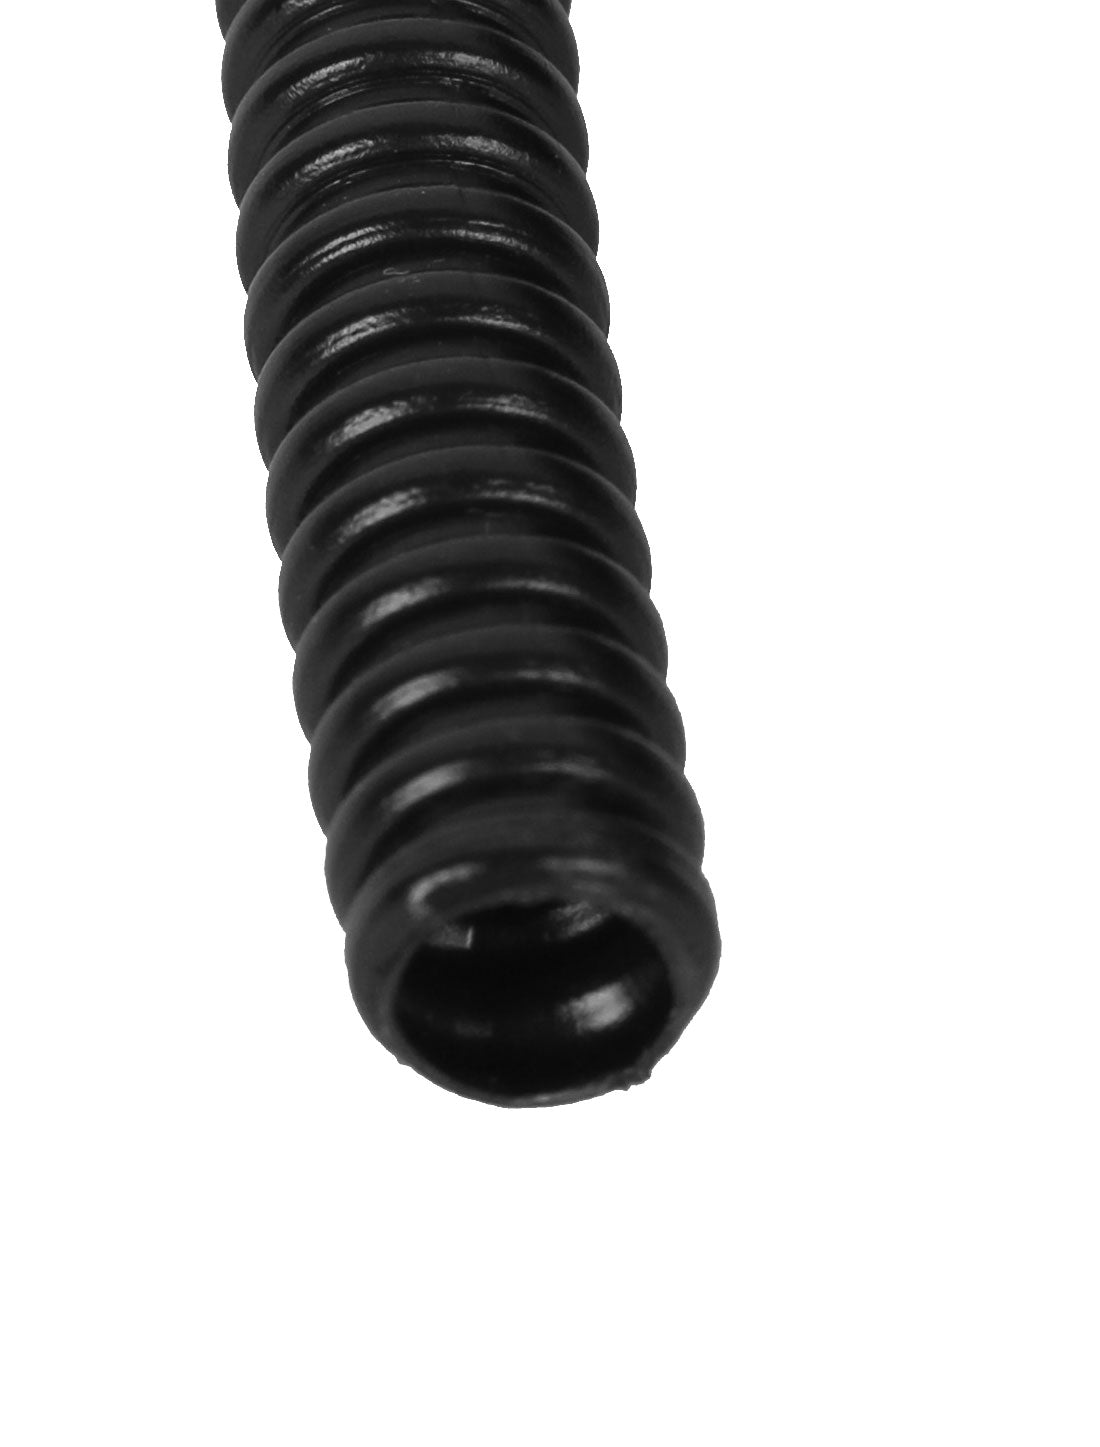 uxcell Uxcell 15 M 5 x 7 mm Plastic Flexible Corrugated Conduit Tube for Garden,Office Black